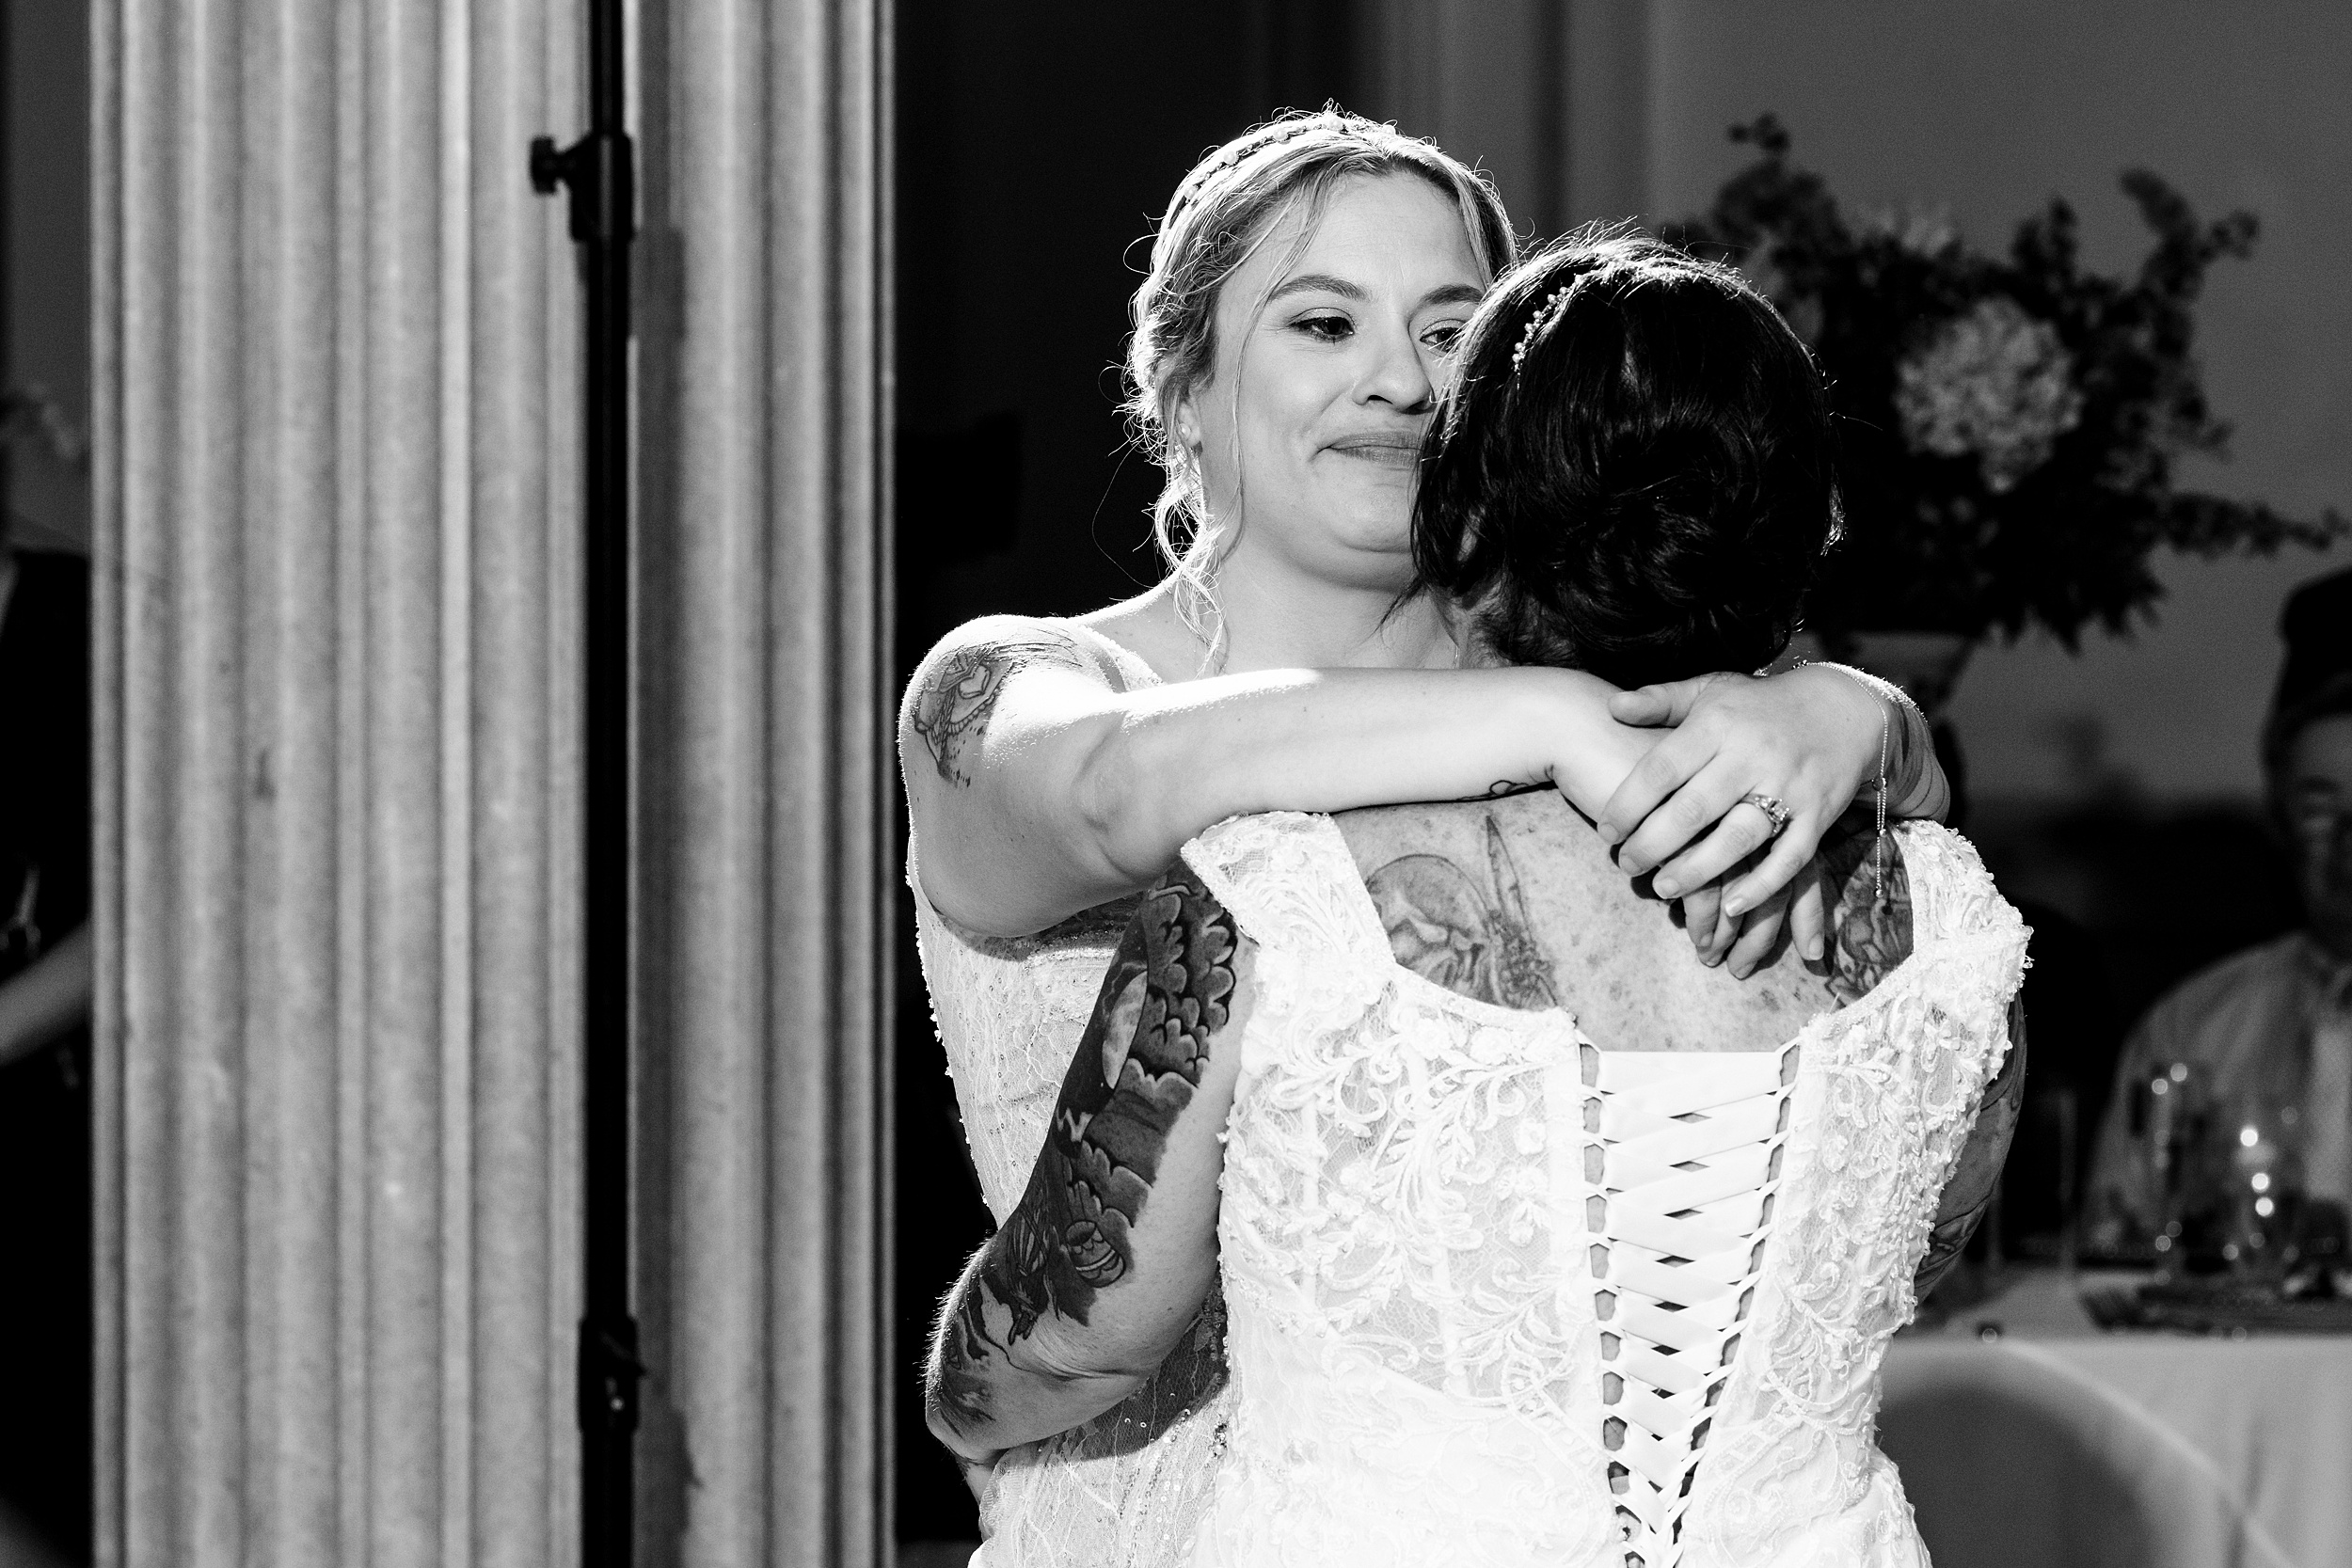 Newlywed brides dance for the first time in lace dresses at their peña-peck house wedding